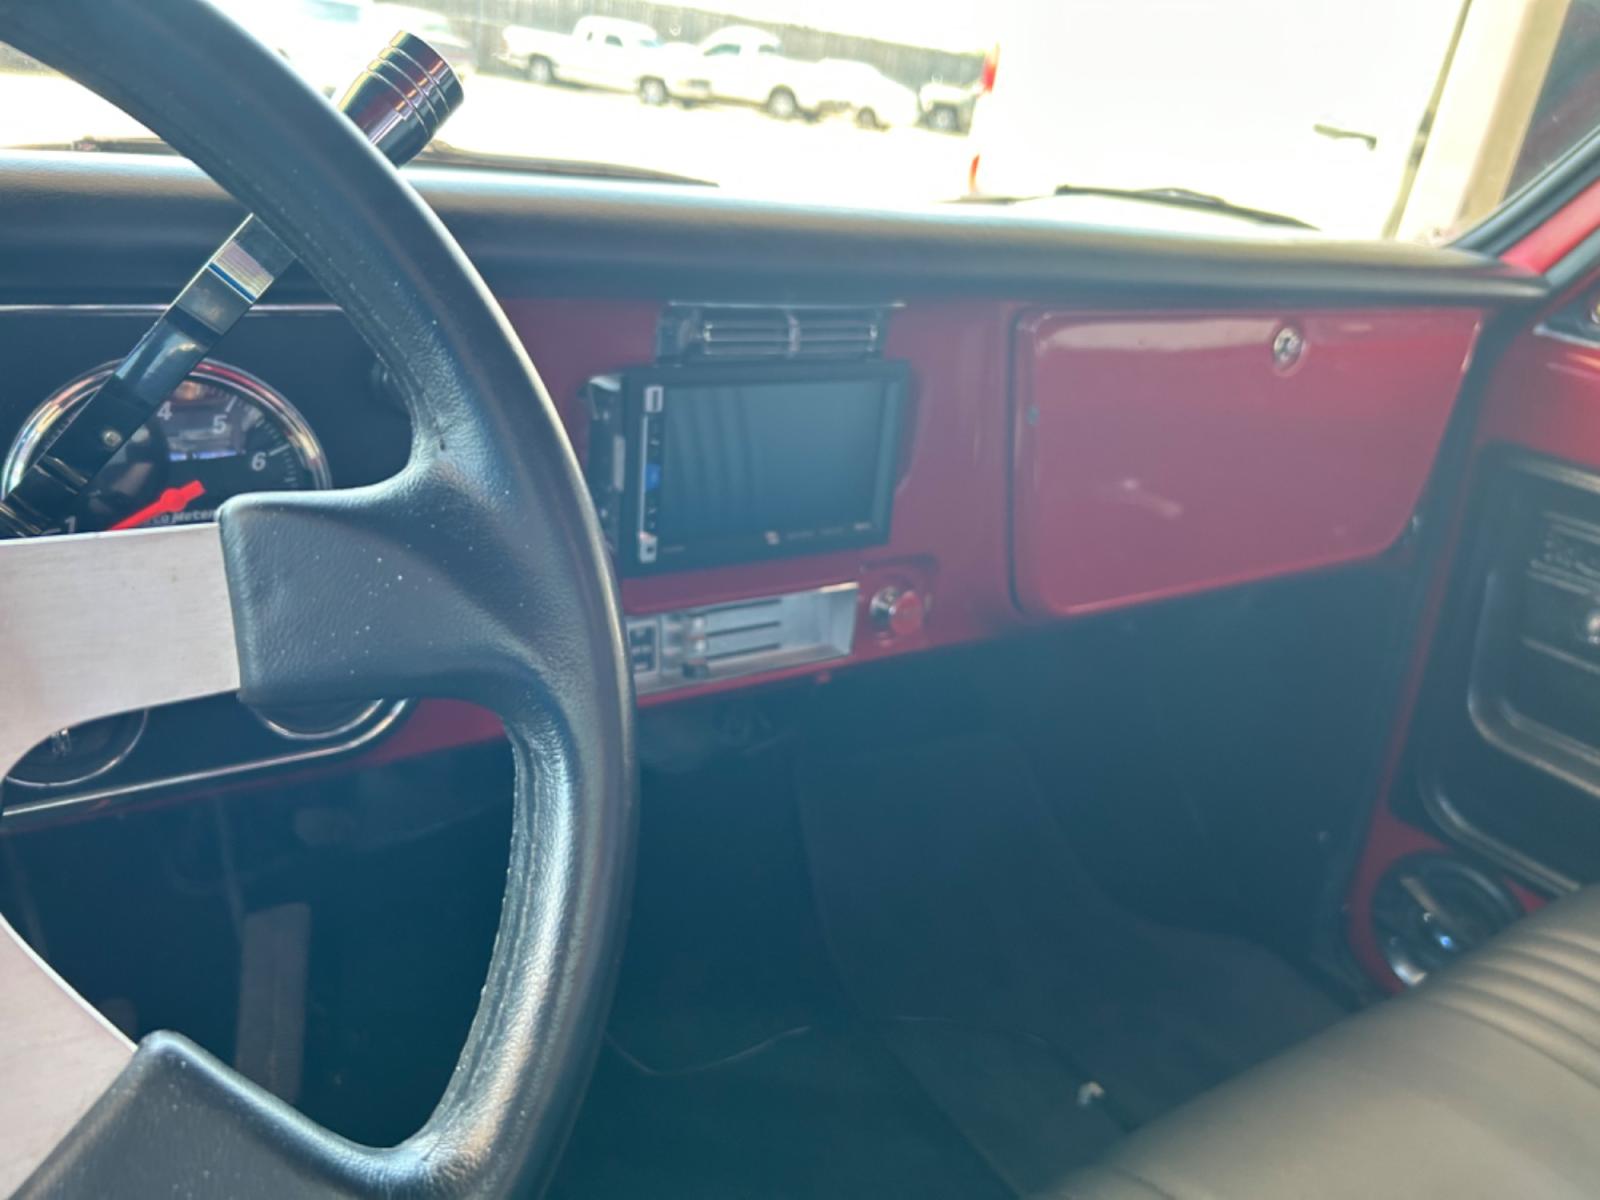 1972 Red Chevrolet C10 (CCE142A1201) , Automatic transmission, located at 1687 Business 35 S, New Braunfels, TX, 78130, (830) 625-7159, 29.655487, -98.051491 - 580 Horse Power - Photo #9